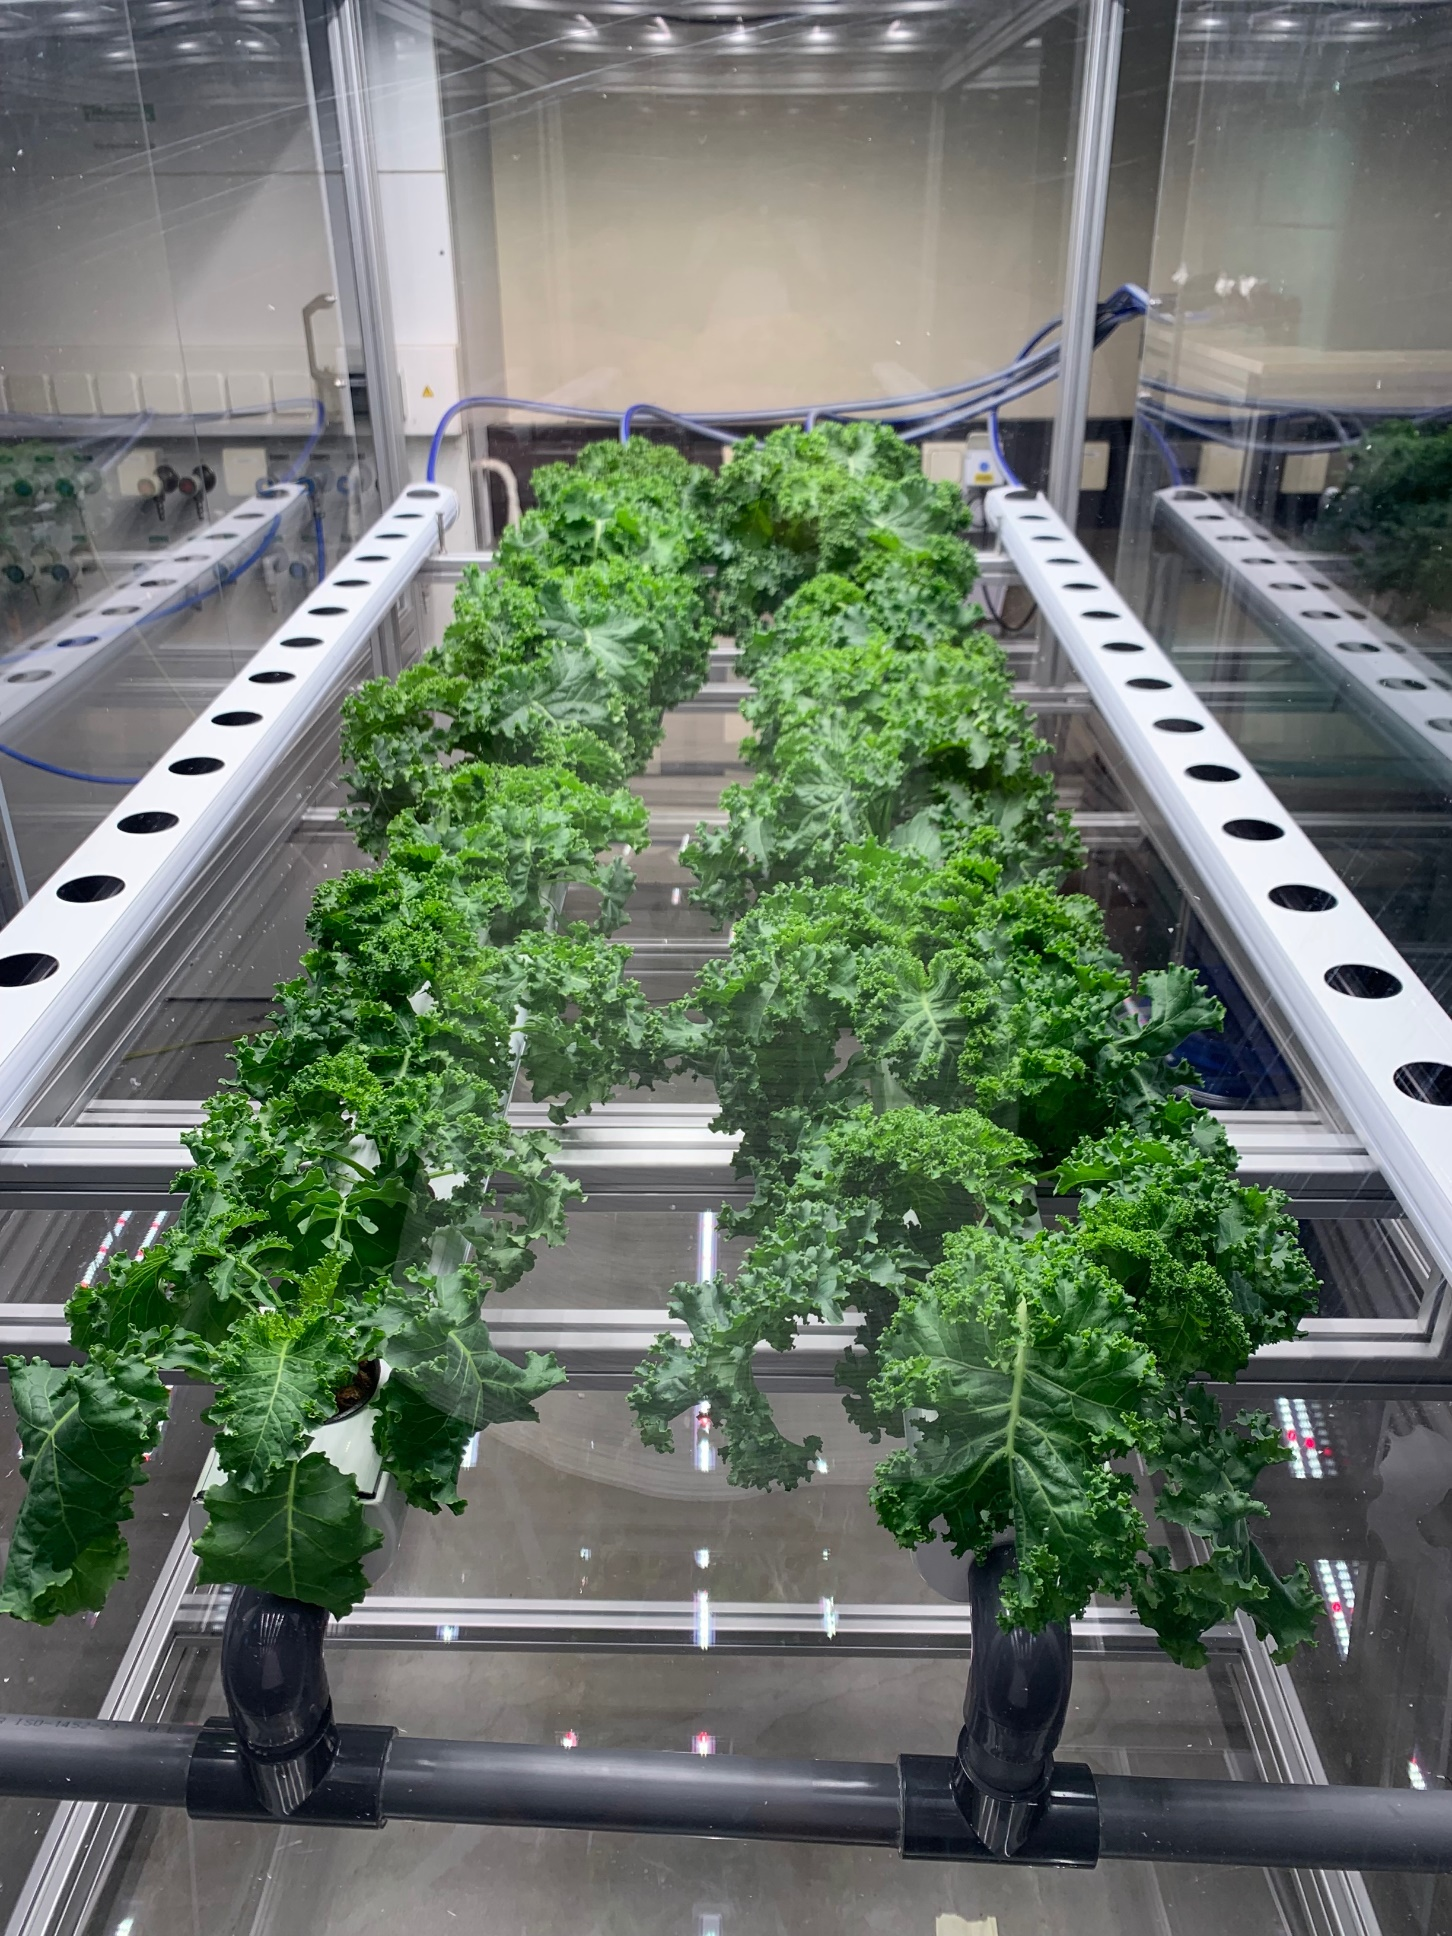 Hydroponic cultivation of kale at the IGB pilot plant facility